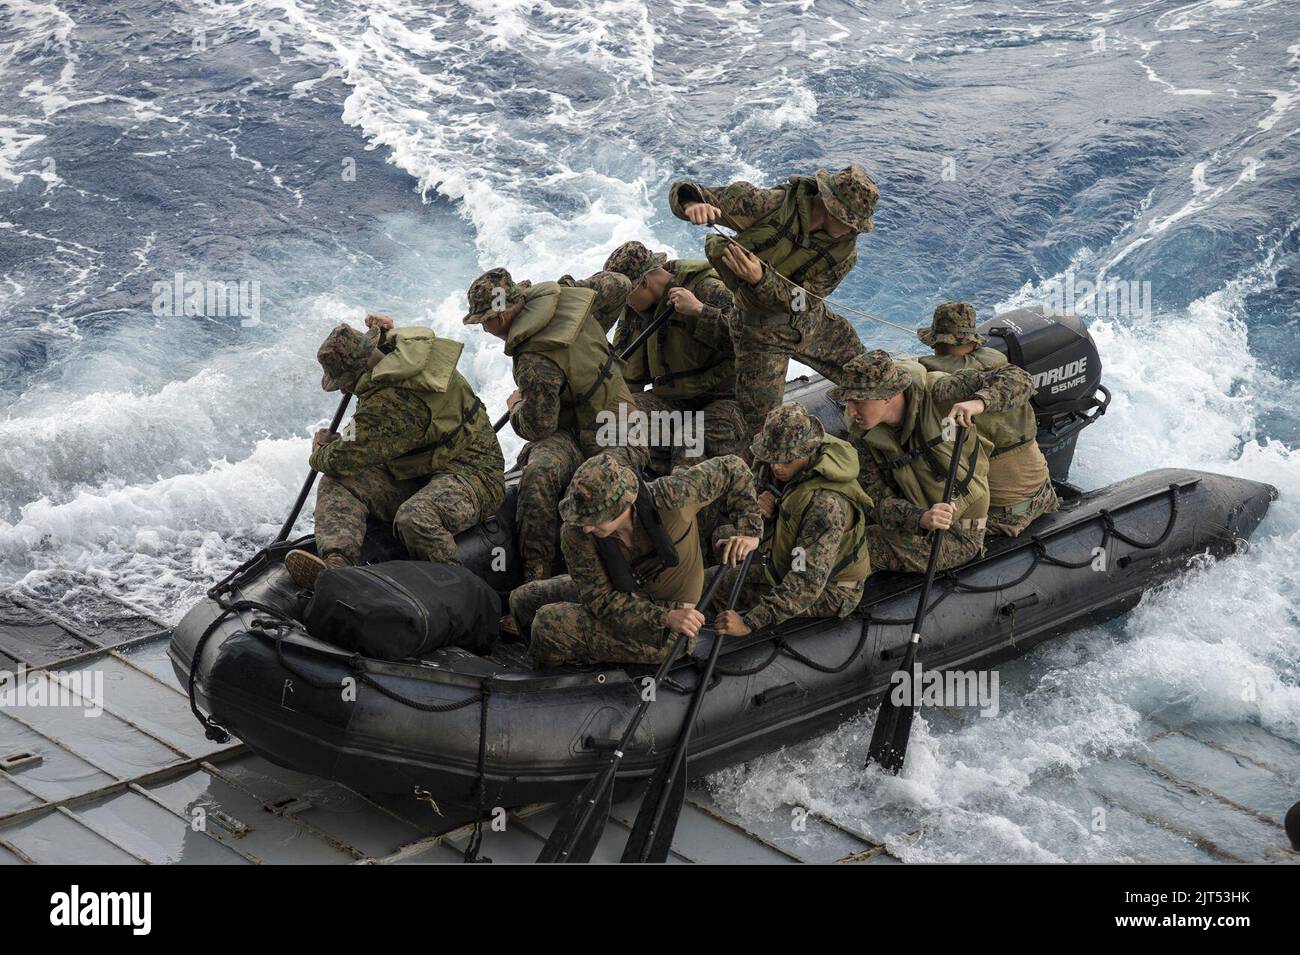 U.S. Marines assigned to Foxtrot Company, Battalion Landing Team, 2nd Battalion, 5th Marine Regiment, 31st Marine Expeditionary Unit conduct launch and recovery operations with a combat rubber raiding craft from 140301 Stock Photo